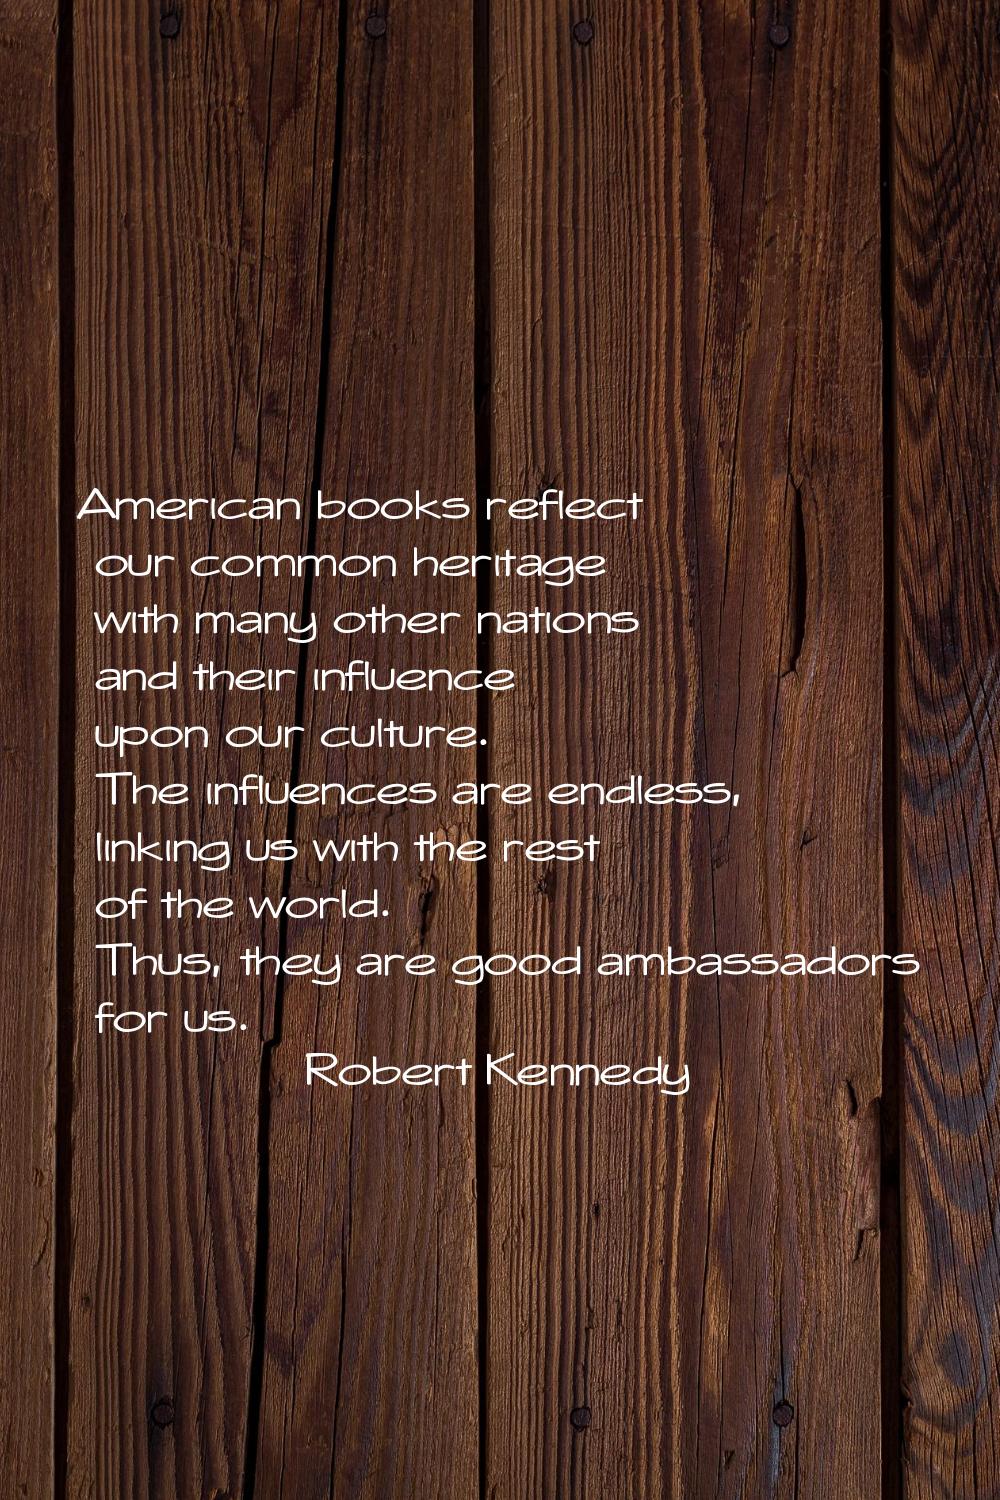 American books reflect our common heritage with many other nations and their influence upon our cul